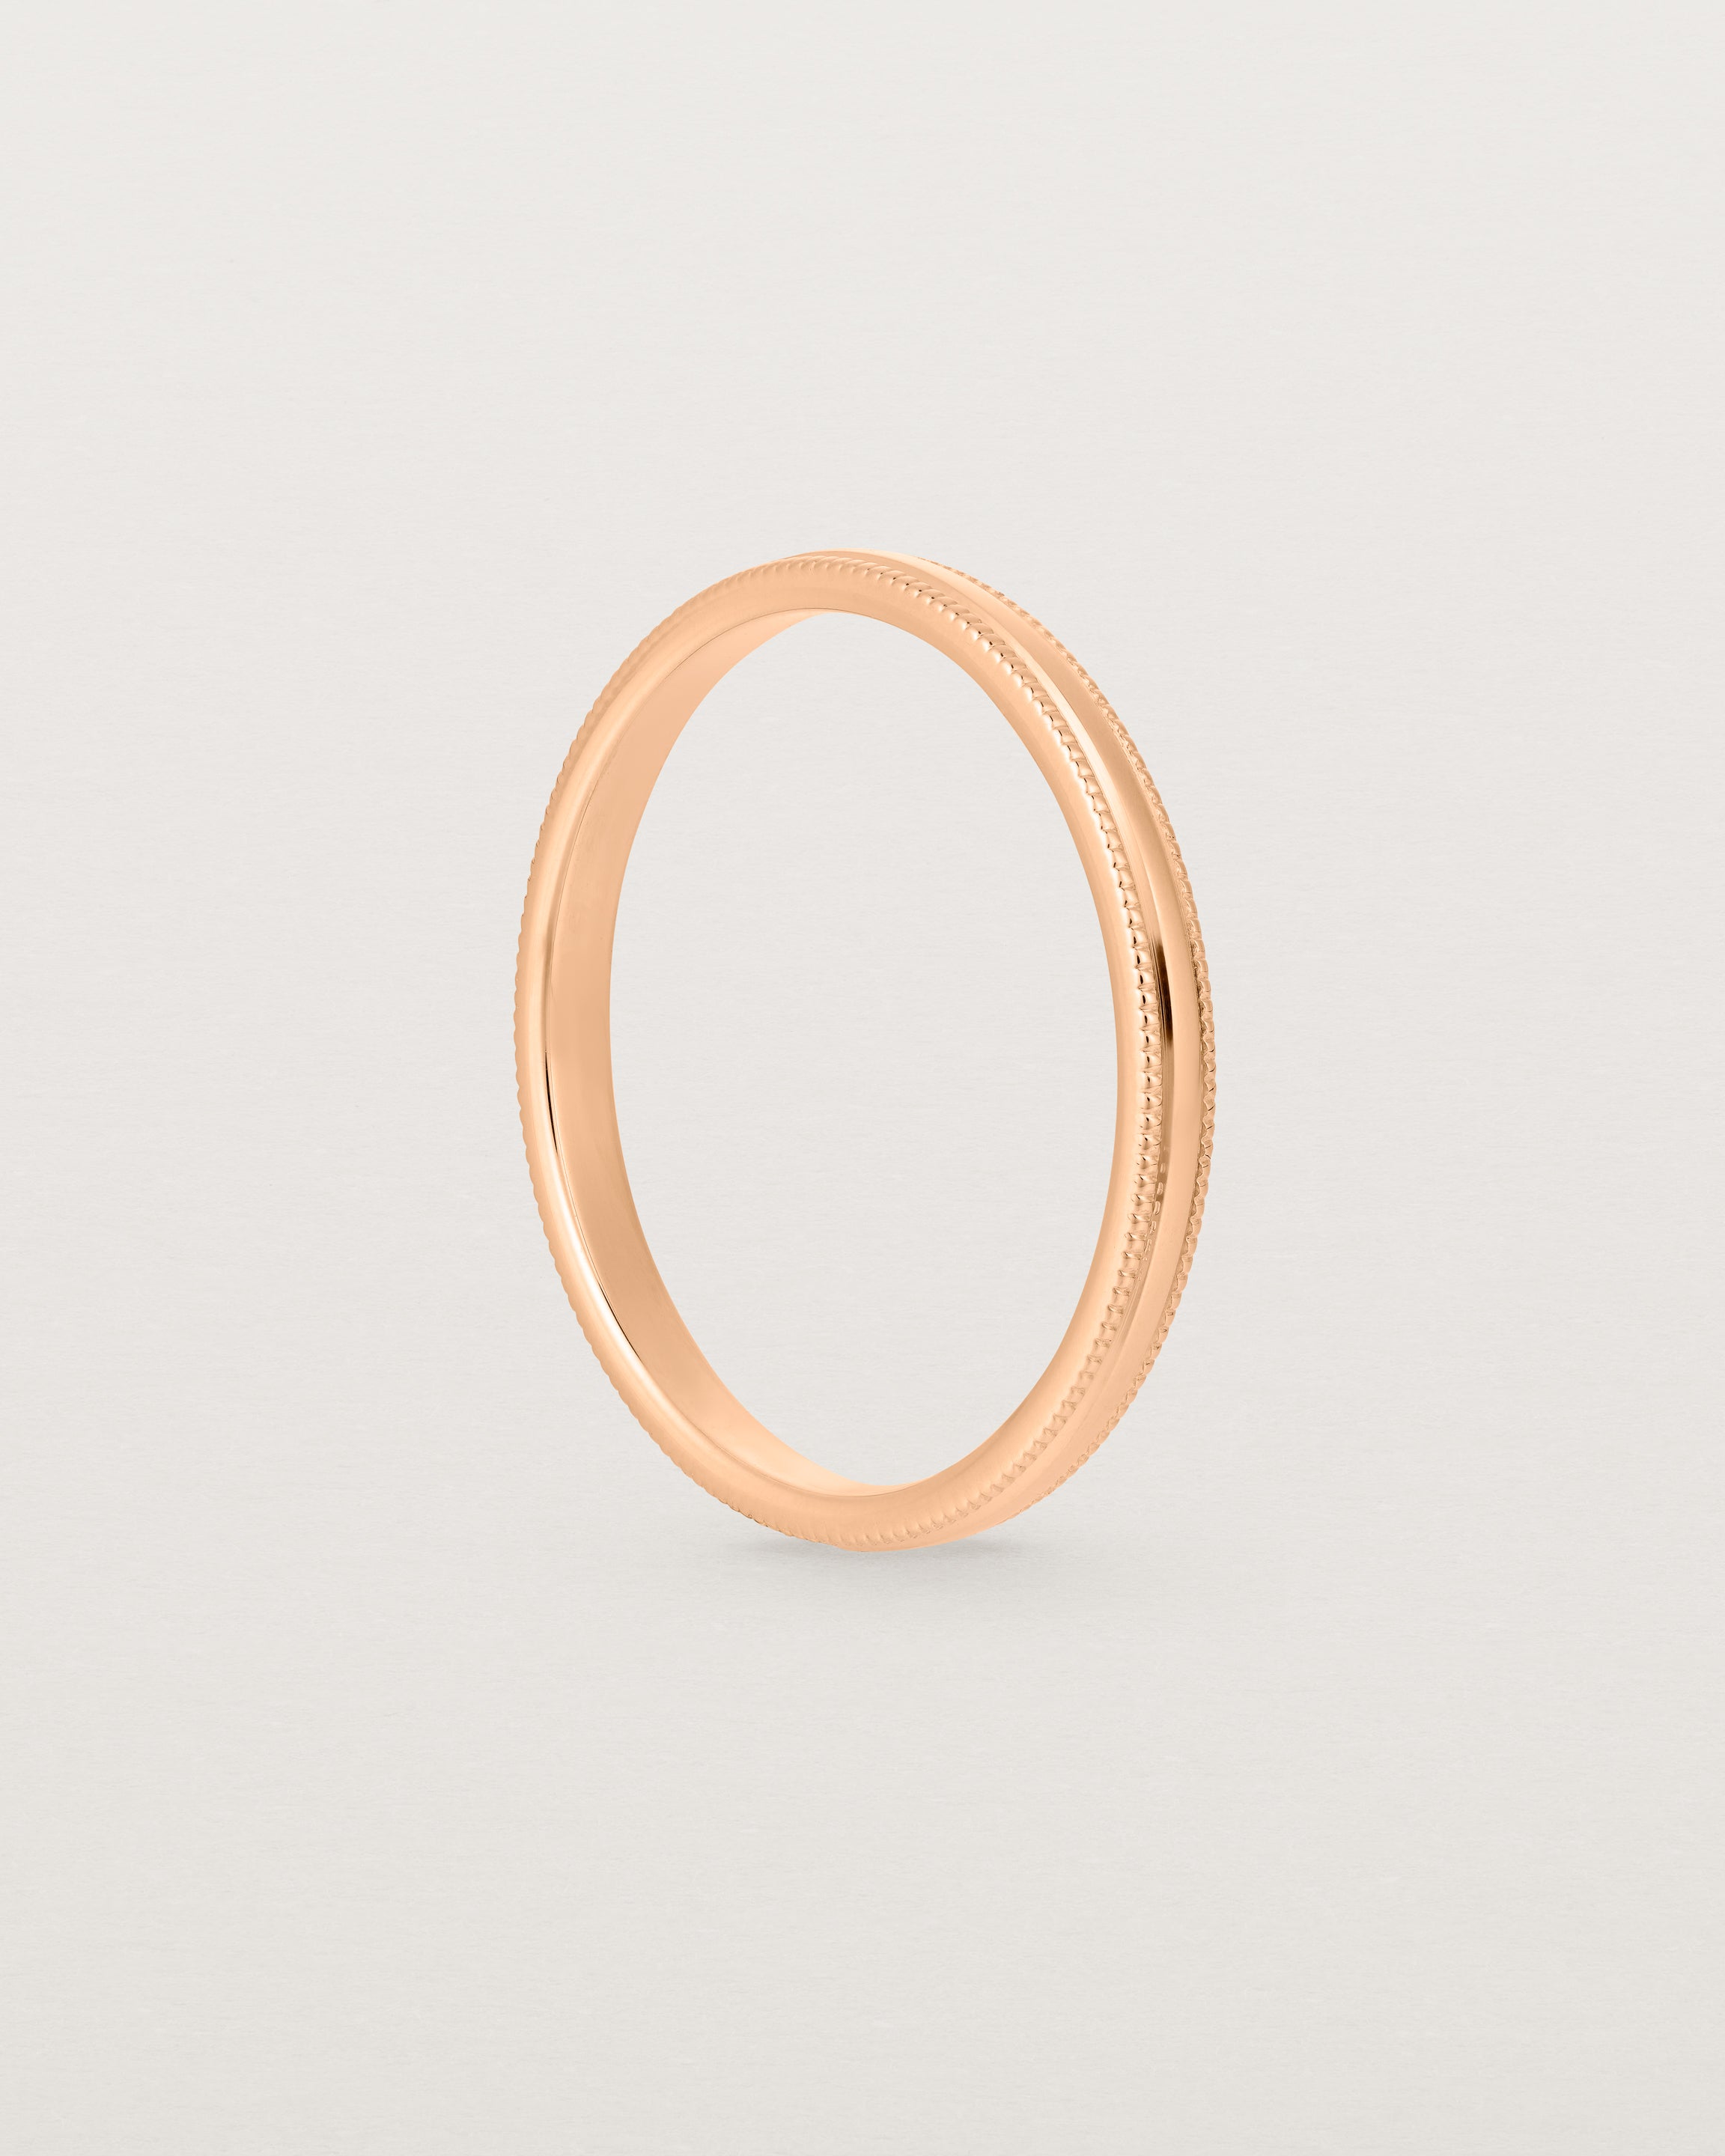 Standing view of the Millgrain Wedding Ring | 2mm in Rose Gold.